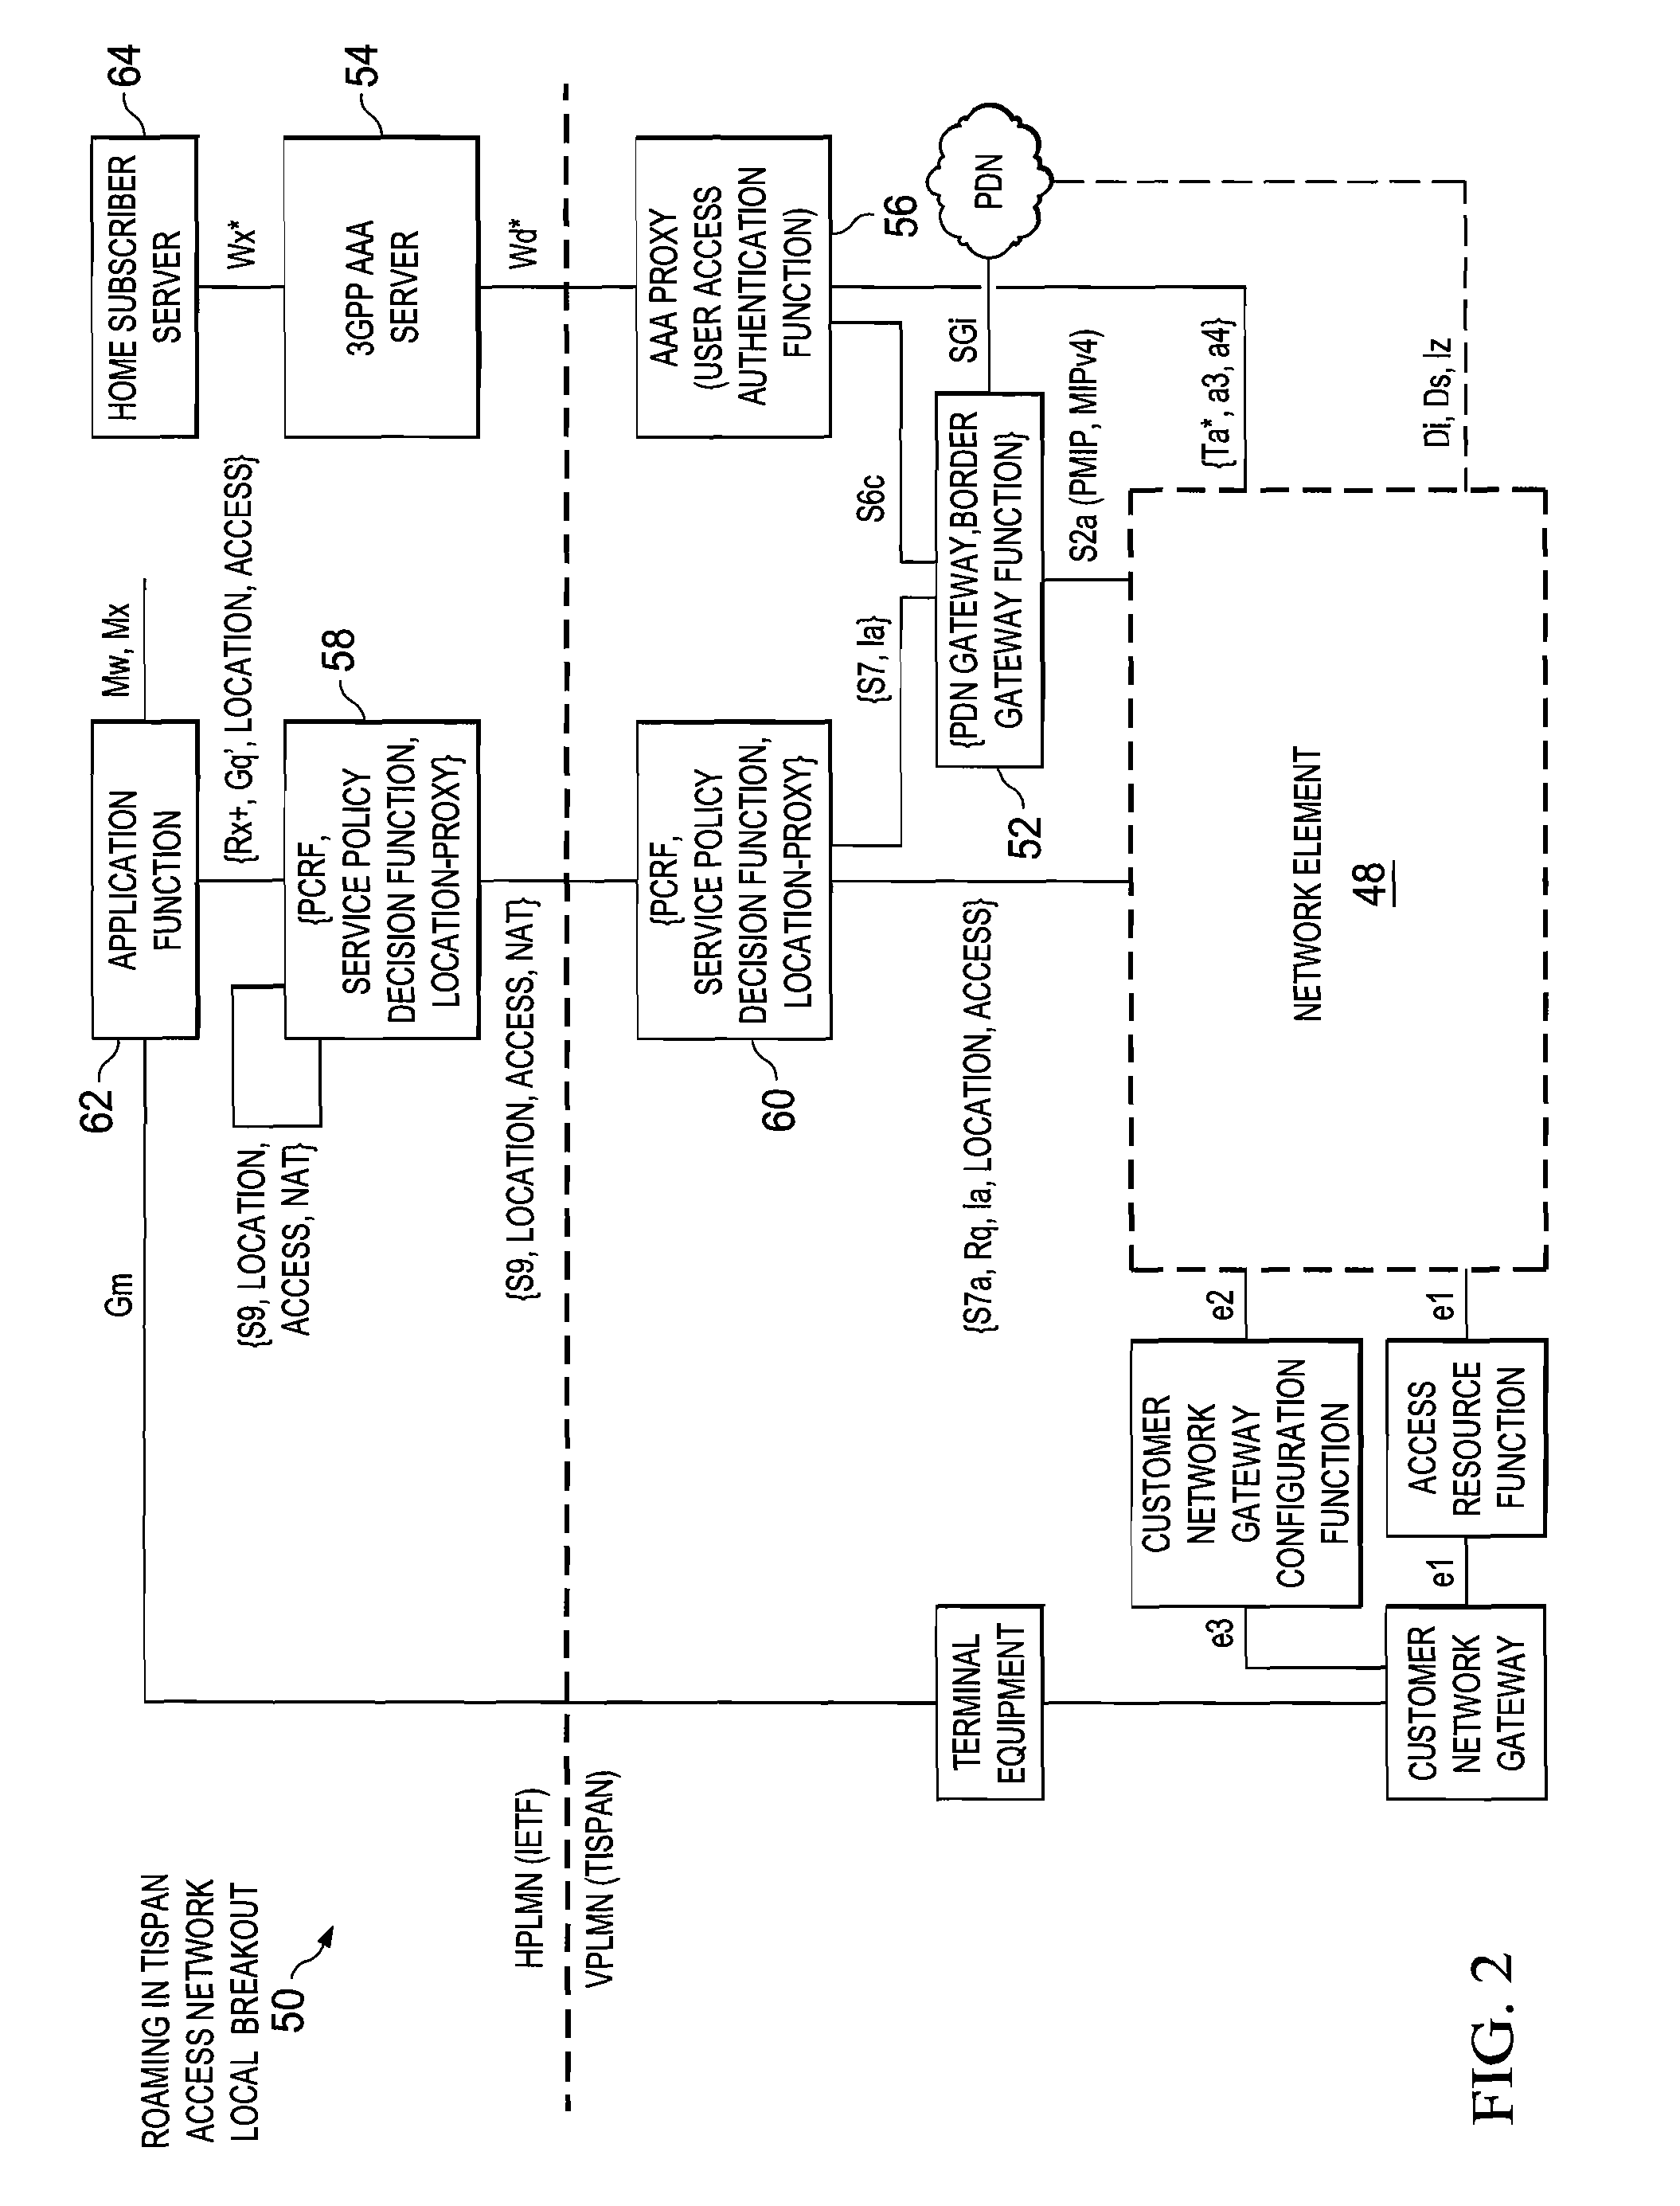 System and method for providing a converged wireline and wireless network environment